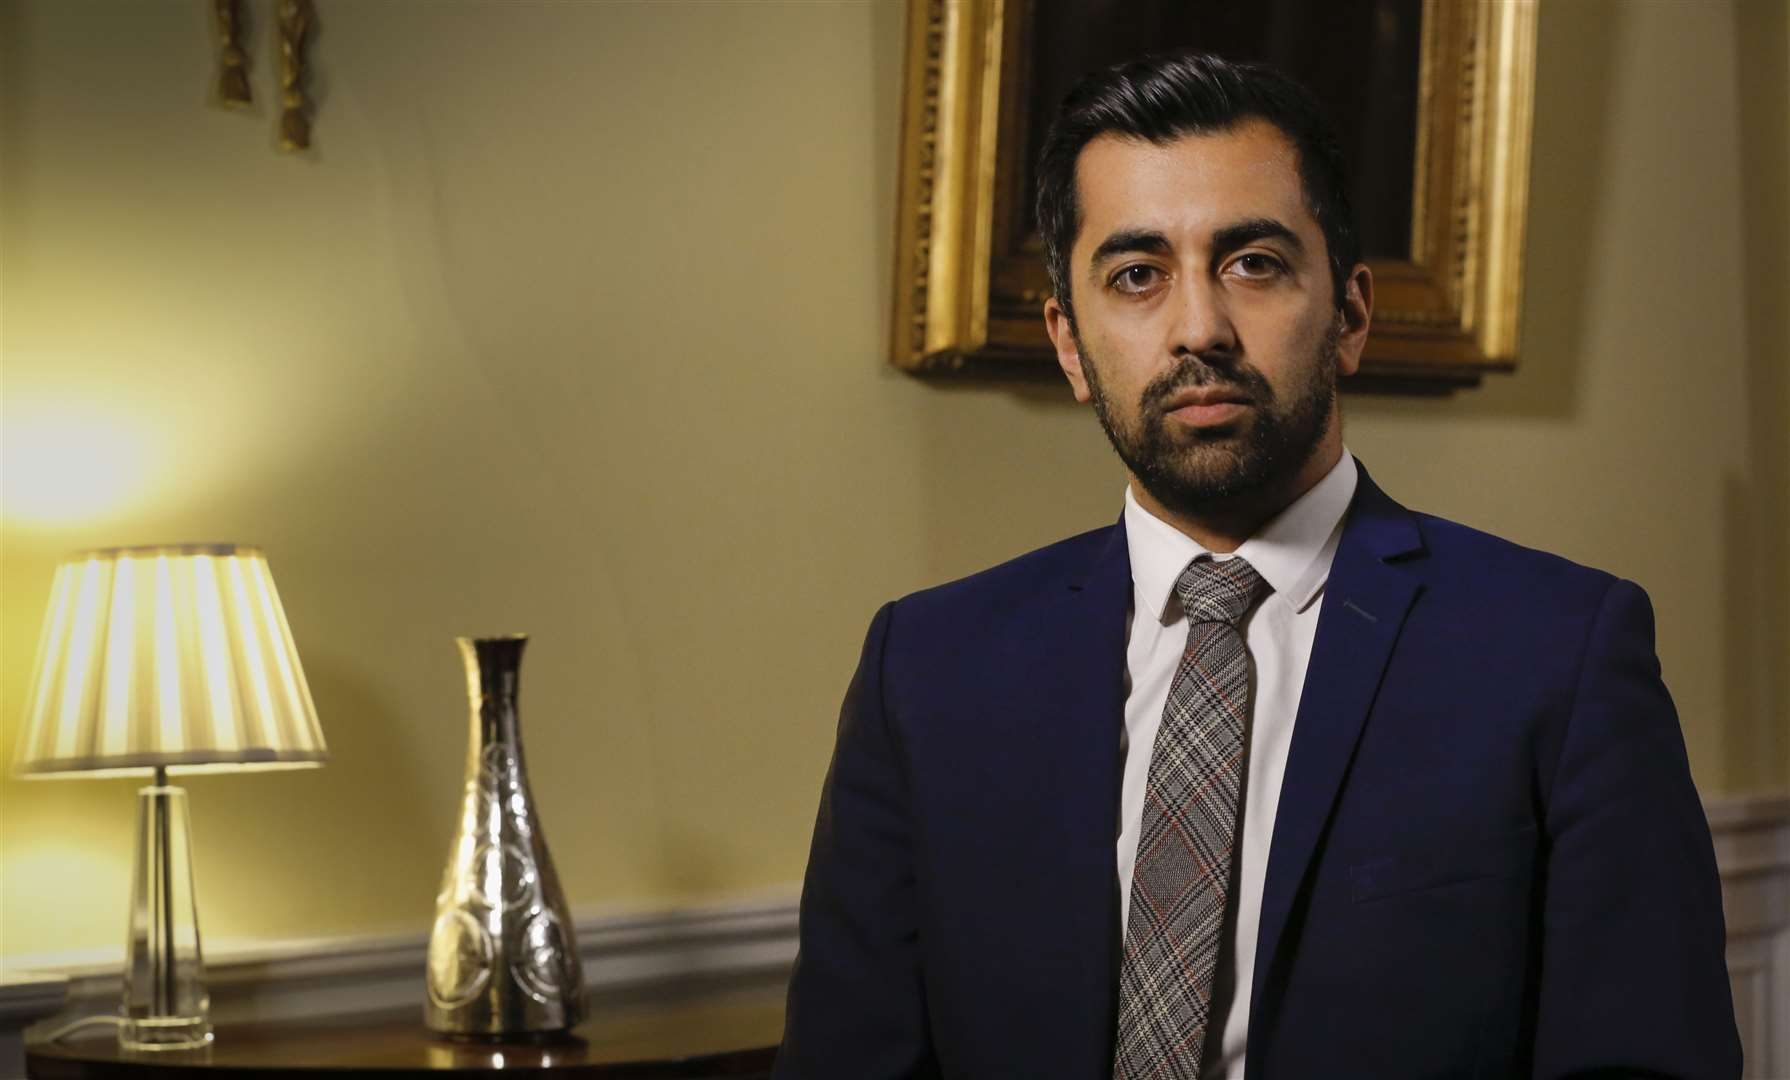 Humza Yousaf was appointed Cabinet Secretary for Health and Social Care last May.